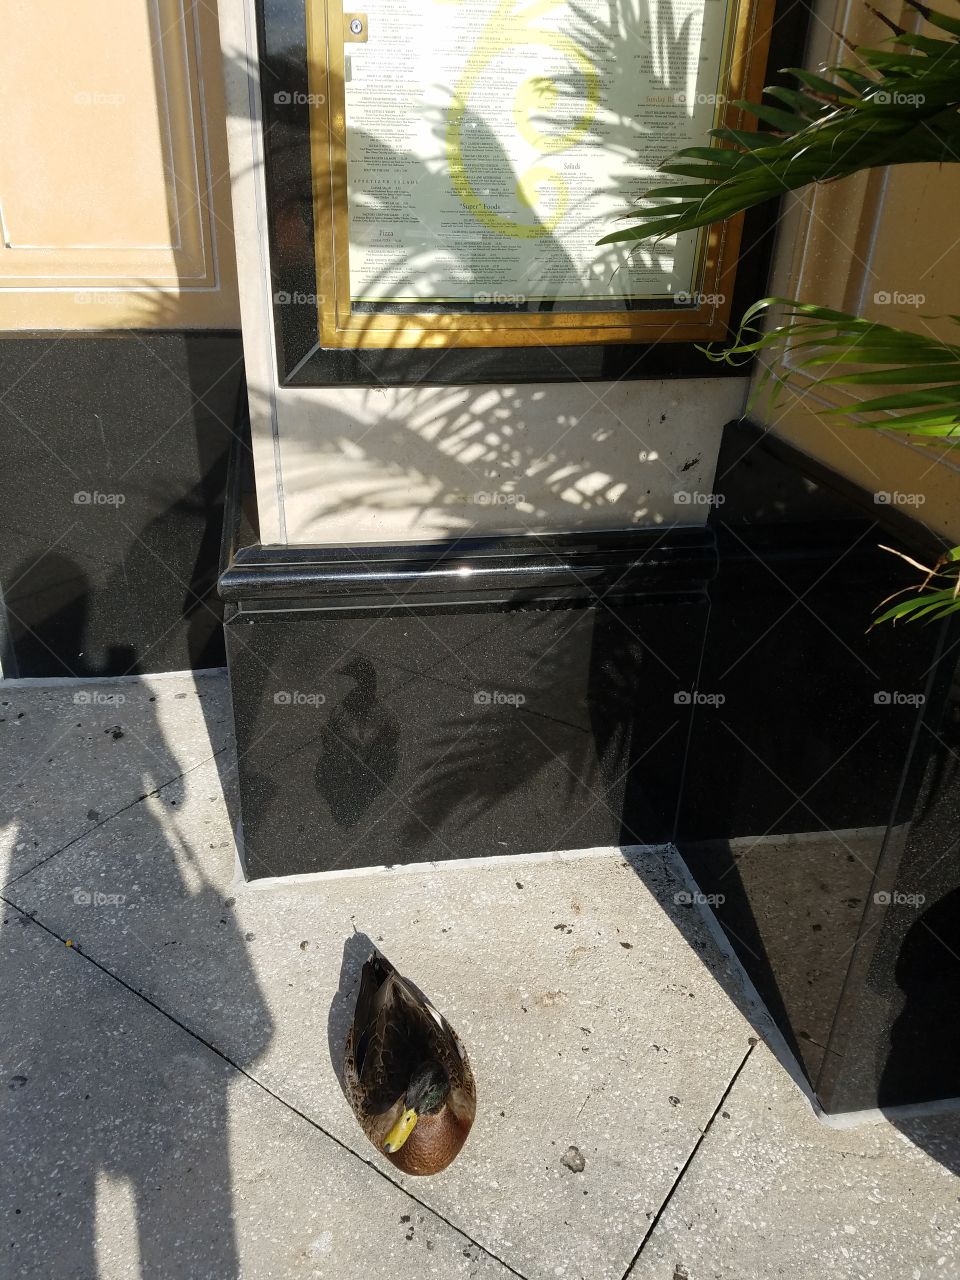 A duck outside the Cheesecake Factory